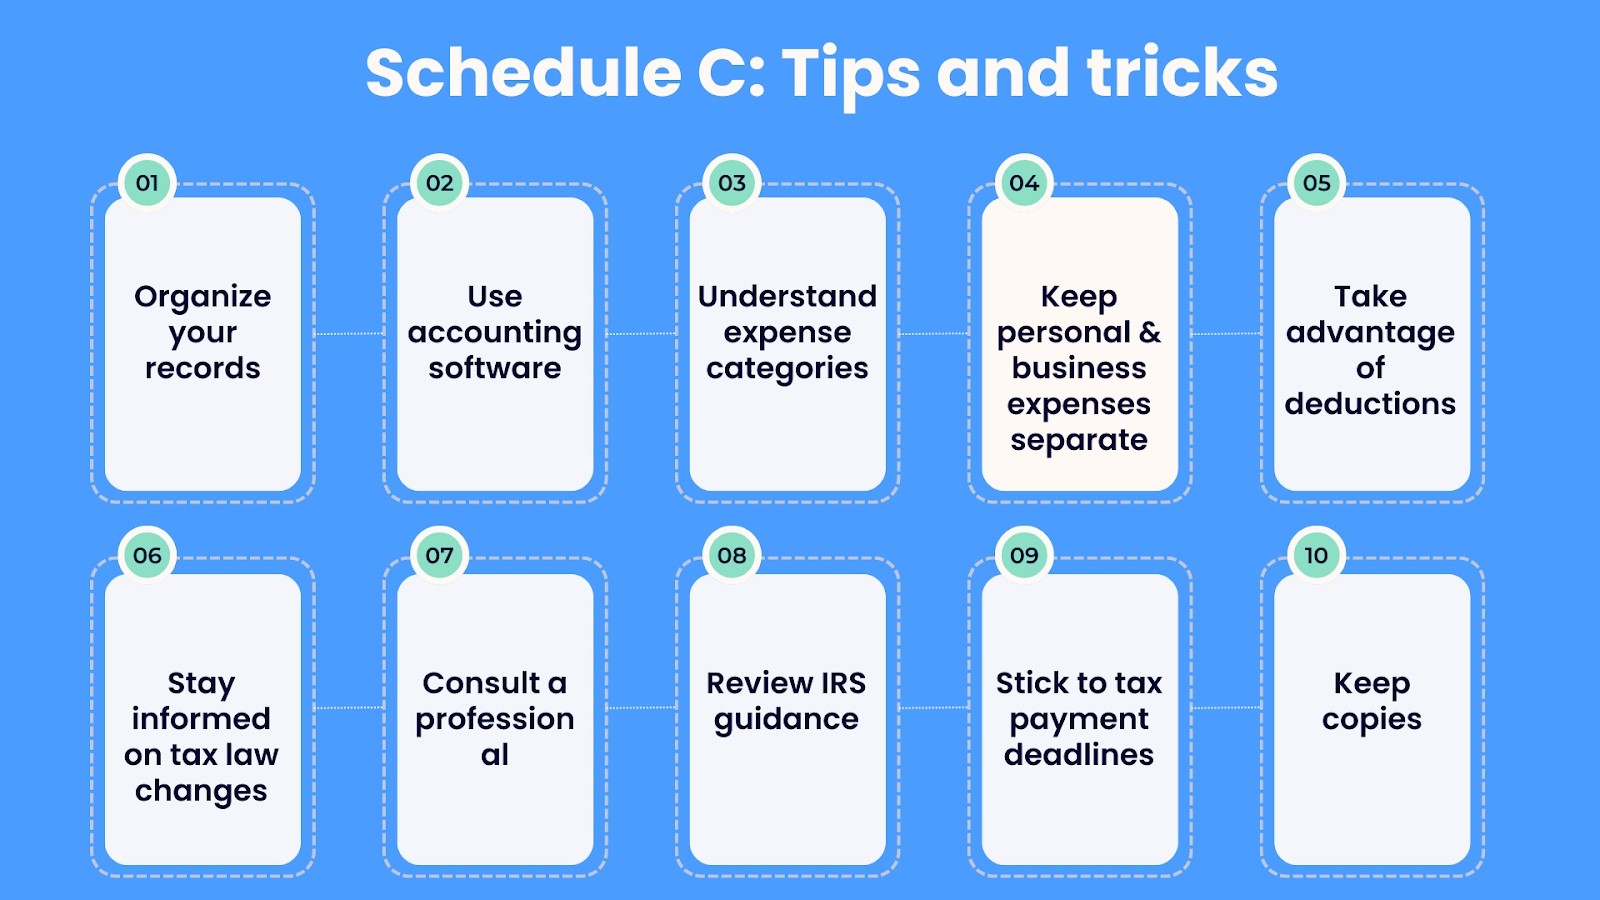 Schedule C Tips and tricks